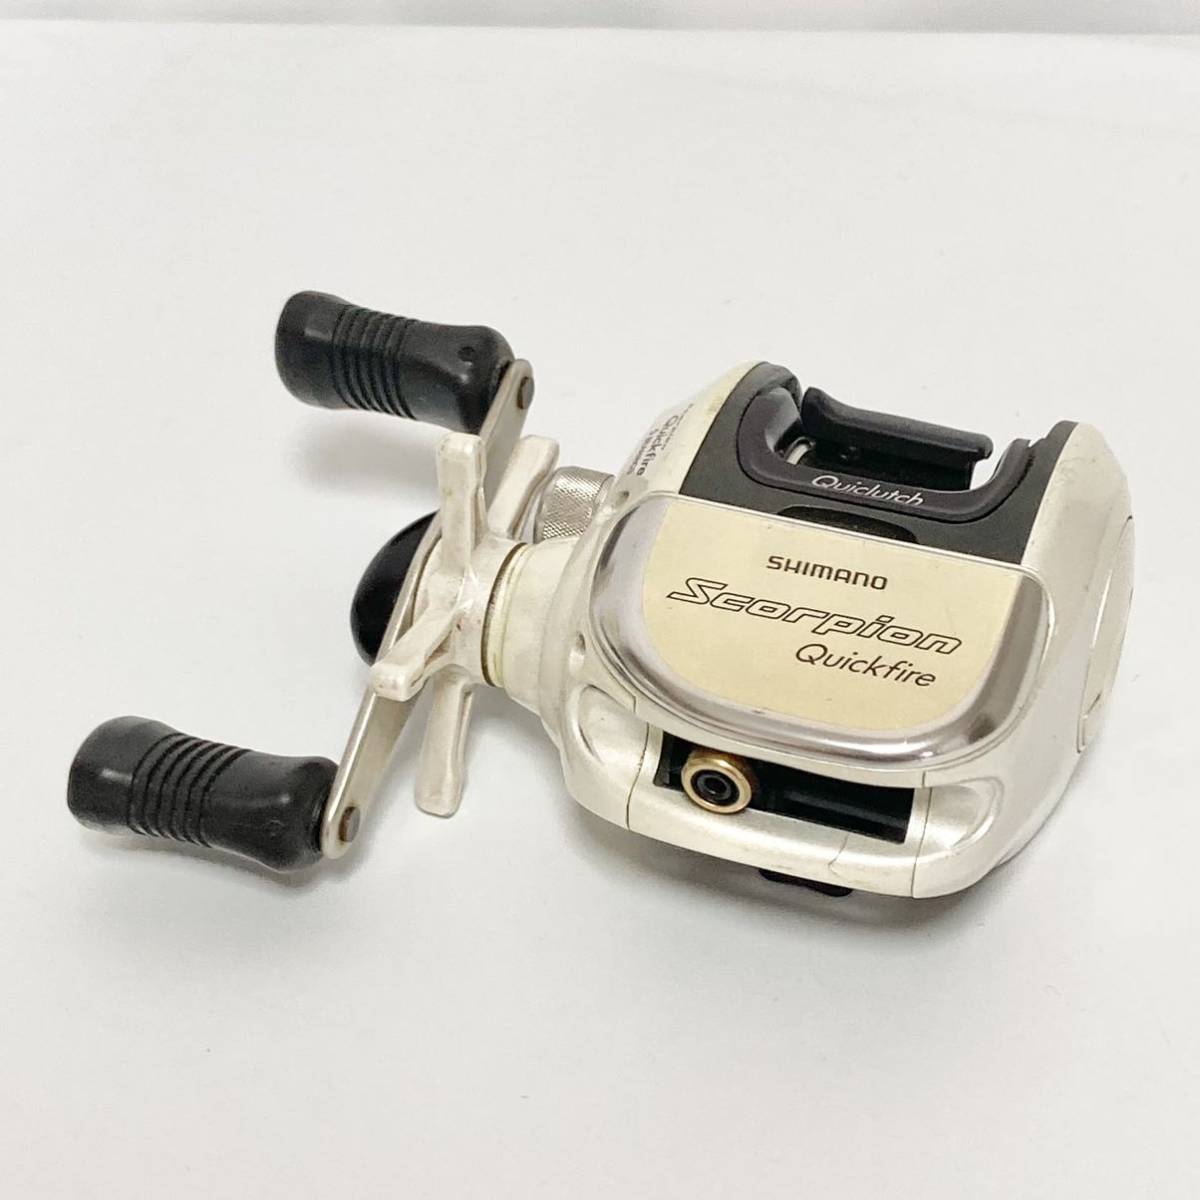 SHIMANO Scorpion Quickfire シマノ スコーピオン クイックファイヤー ベイトリール クイックファイアー product  details | Yahoo! Auctions Japan proxy bidding and shopping service | FROM  JAPAN